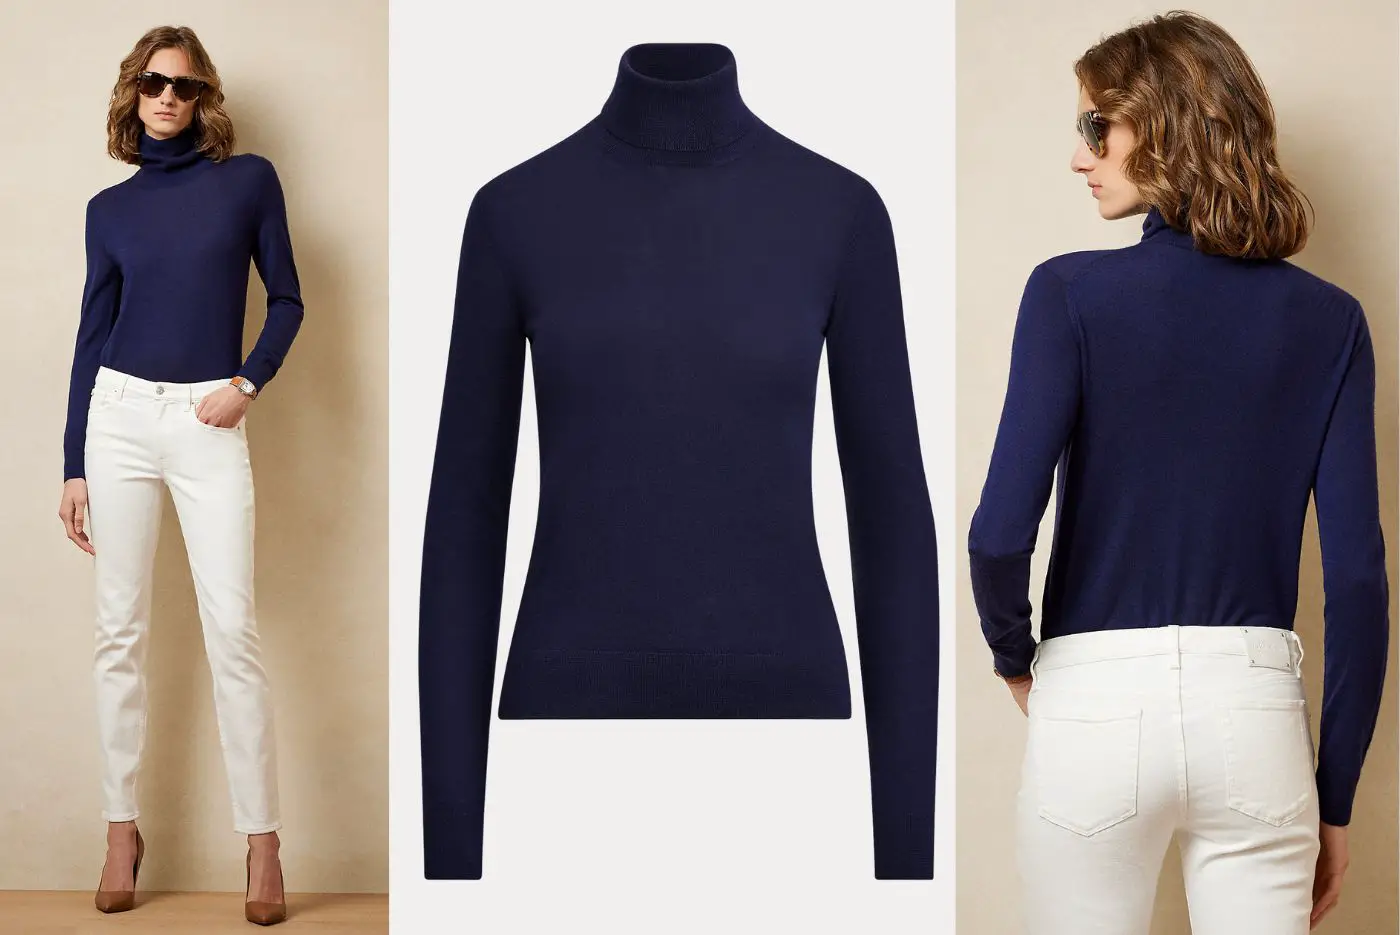 The Princess of Wales wore Ralph Lauren Collection Cashmere Turtleneck